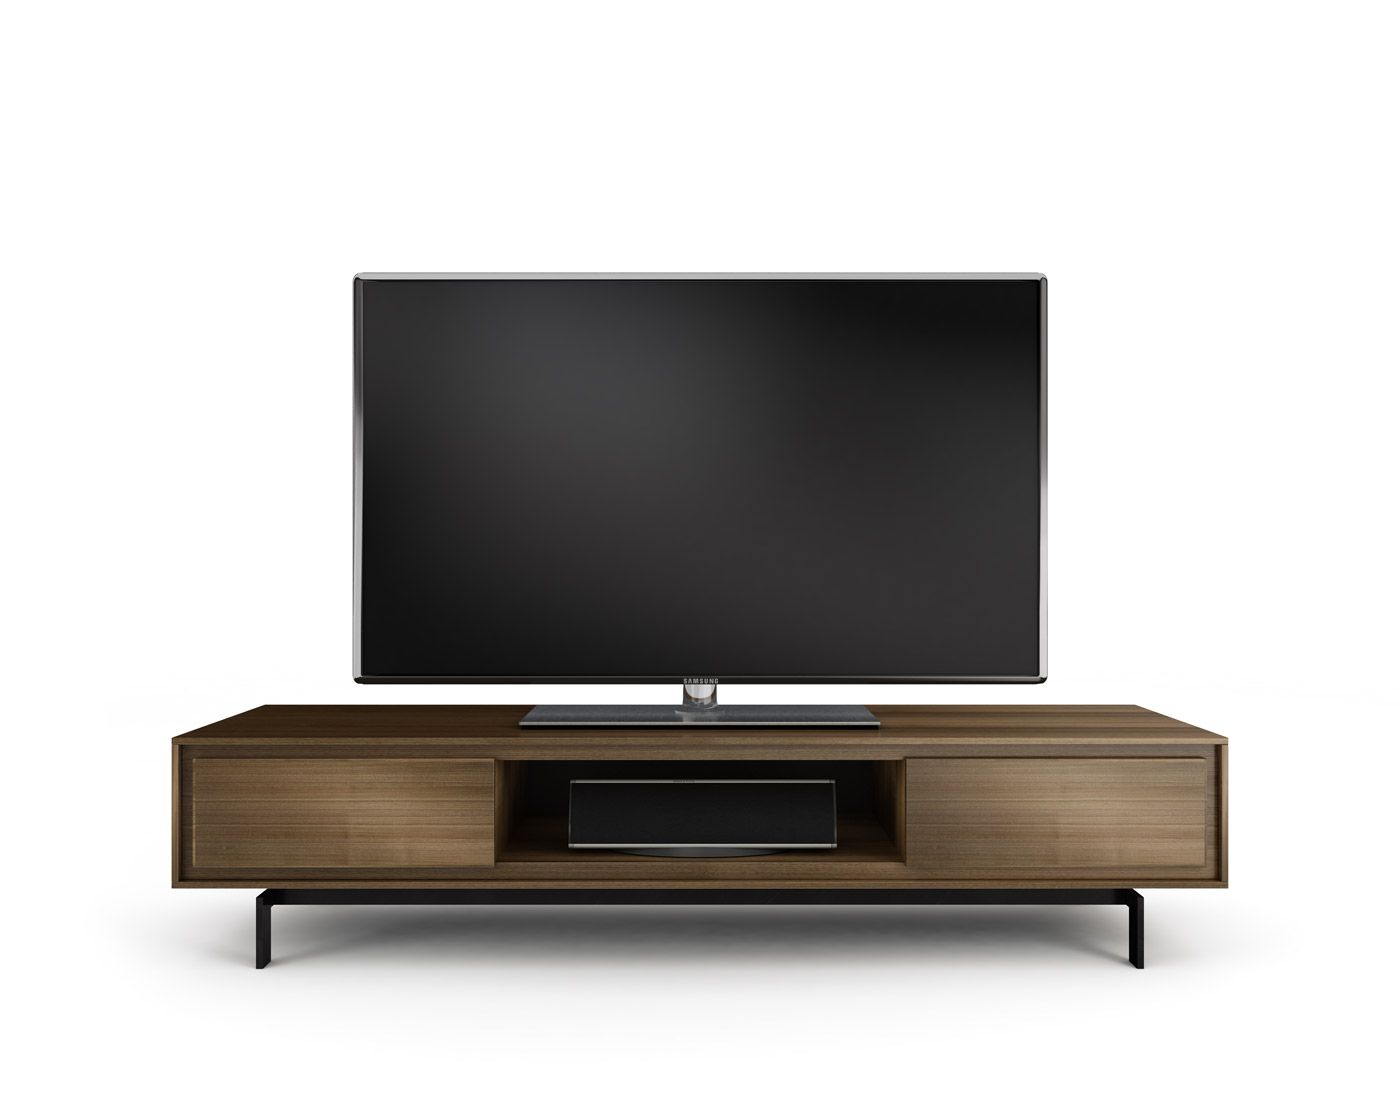 Signal 8323 Tv Stand – Bdi Designer Tv Stands And Cabinets With Modern Low Profile Tv Stands (View 14 of 15)